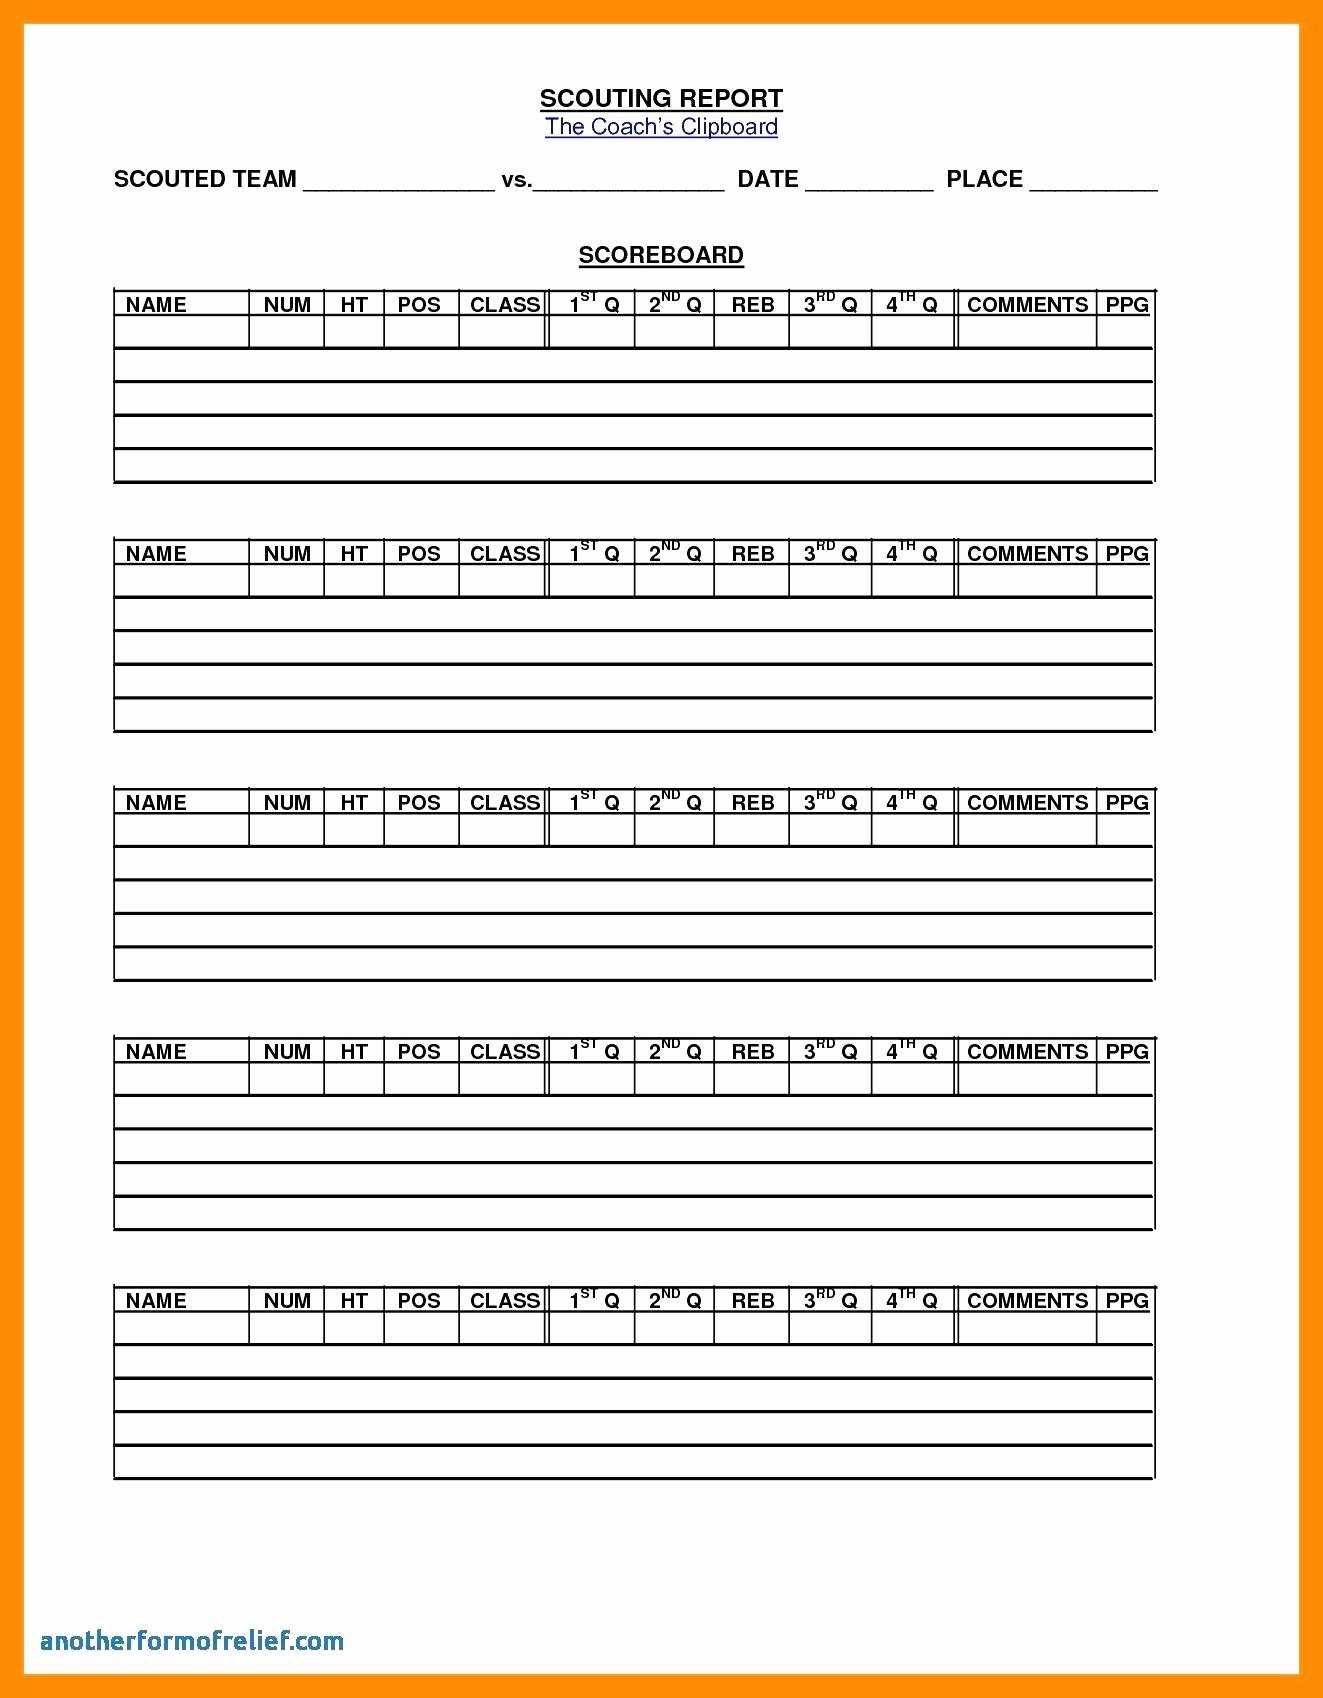 2E6D Basketball Scouting Report Template Sheets Intended For Scouting Report Template Basketball